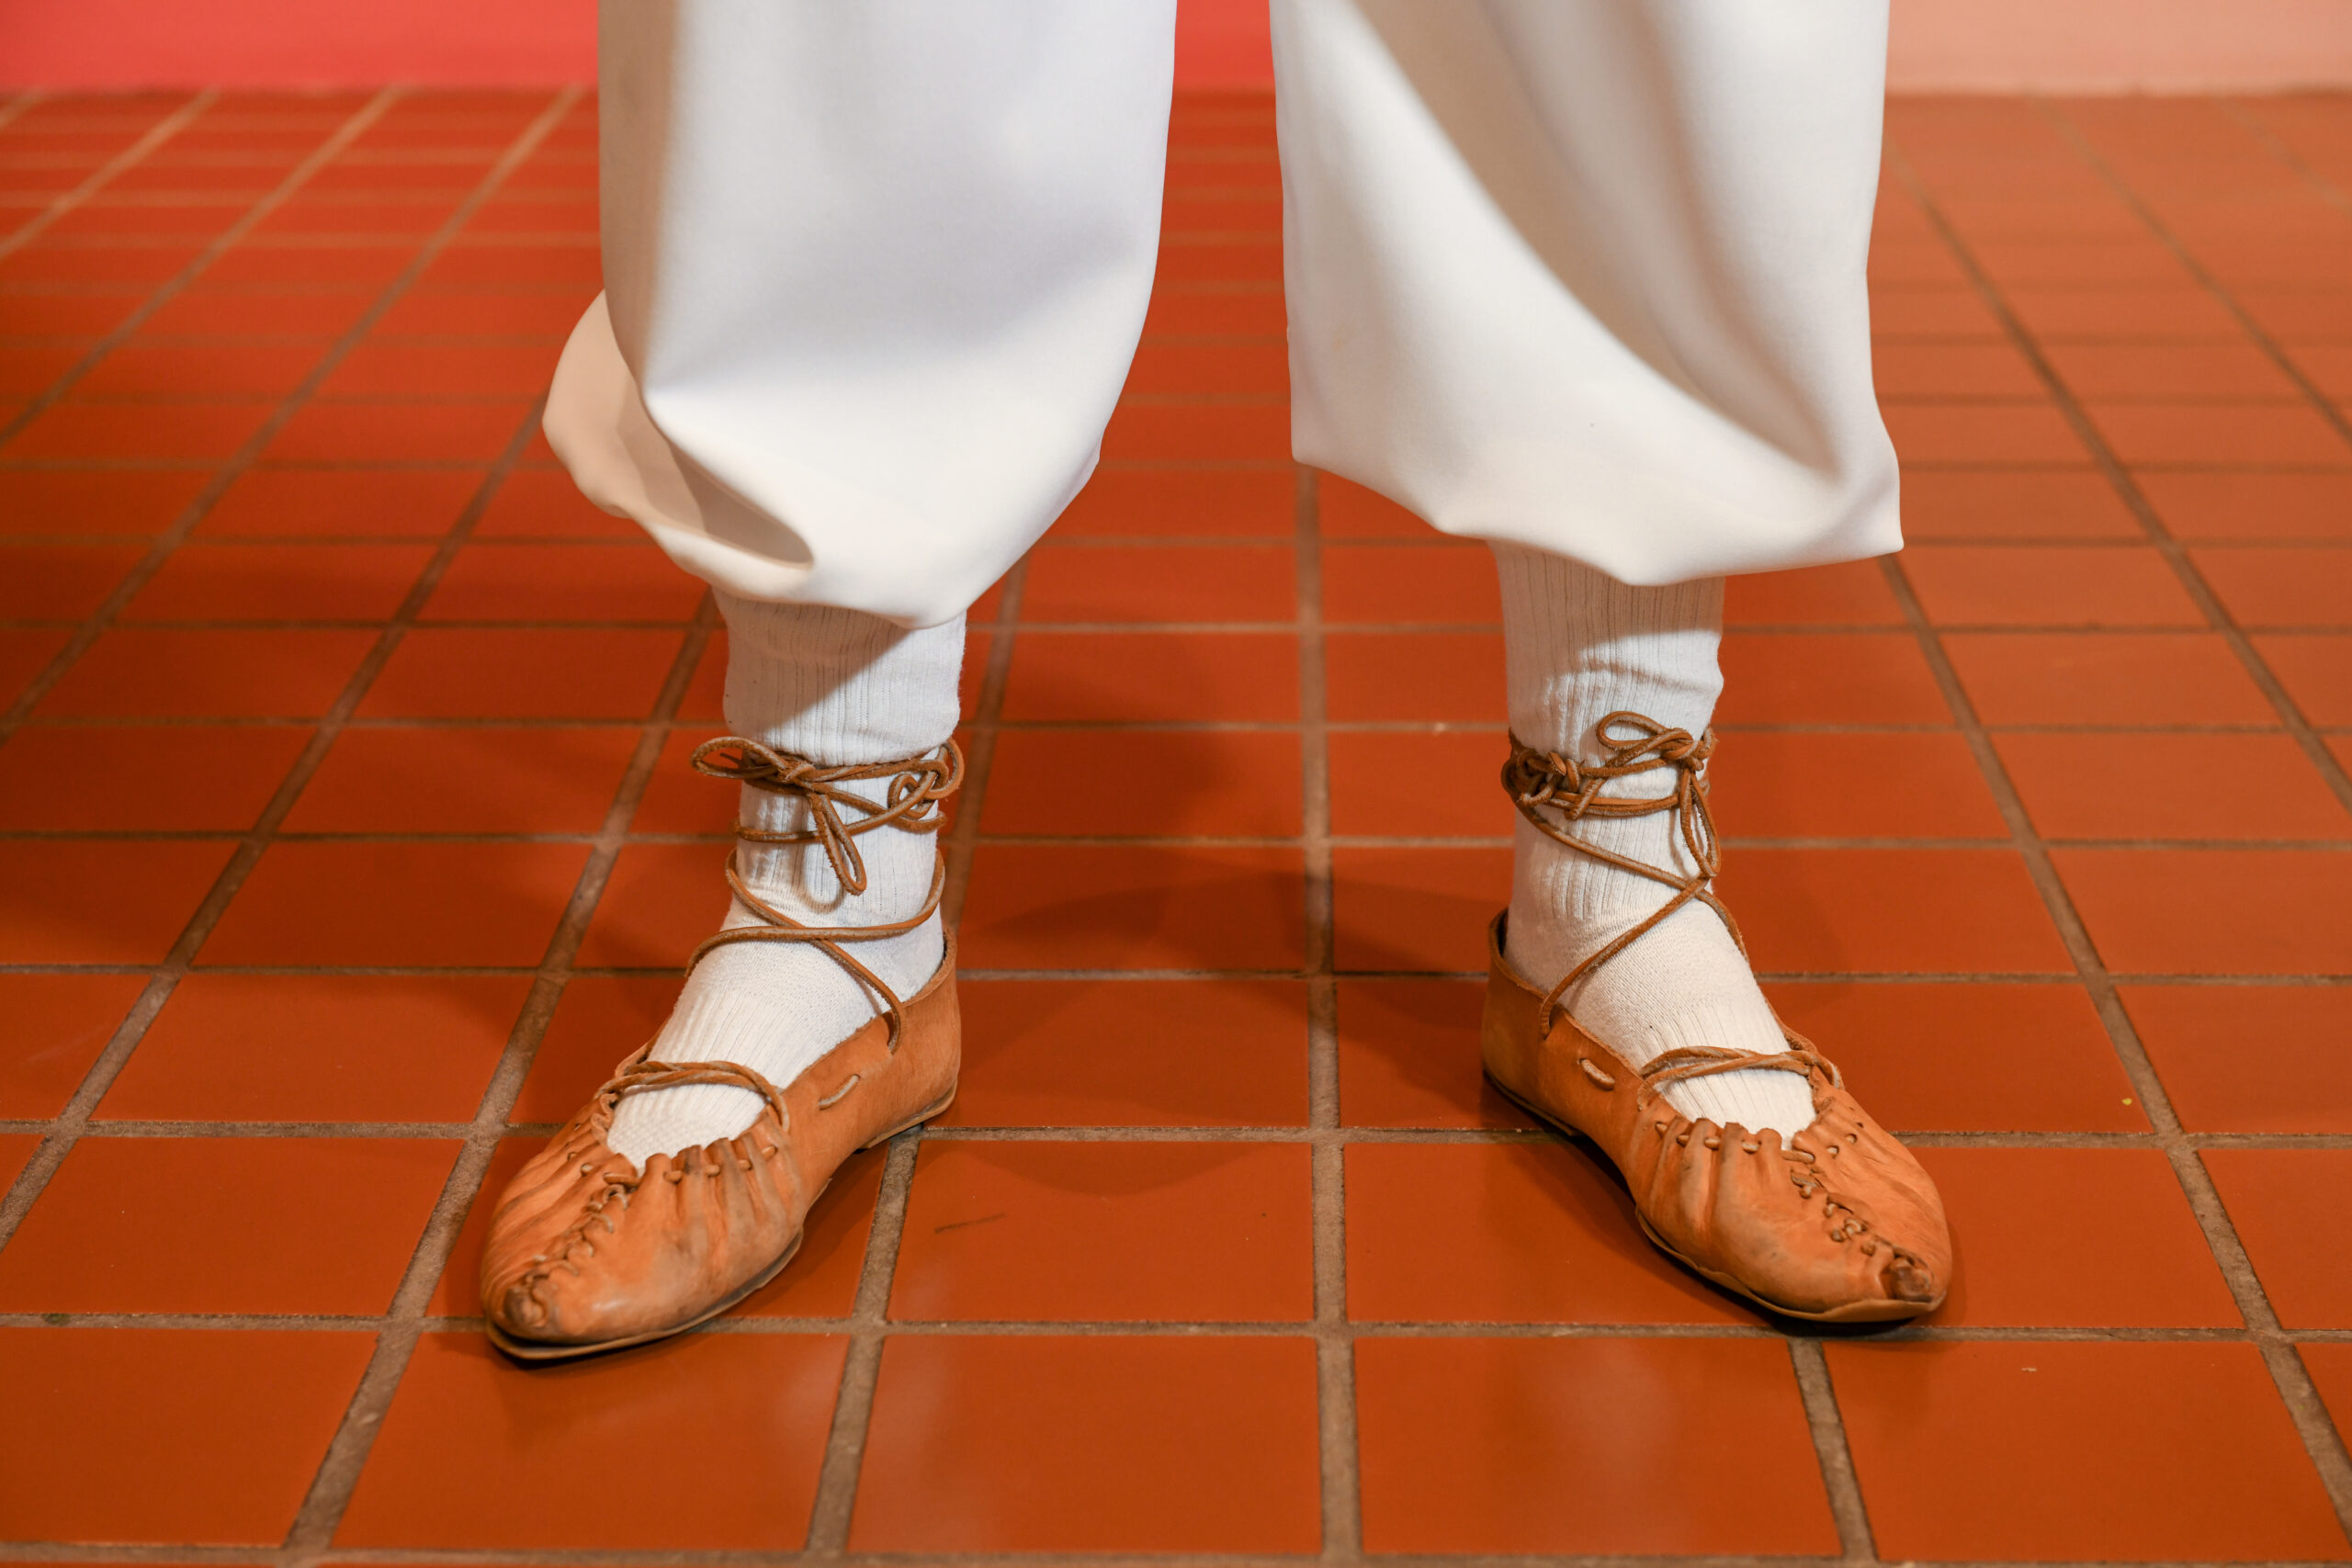 A close up of the men's traditional dancing slippers made of leather with straps that tie around the ankle.